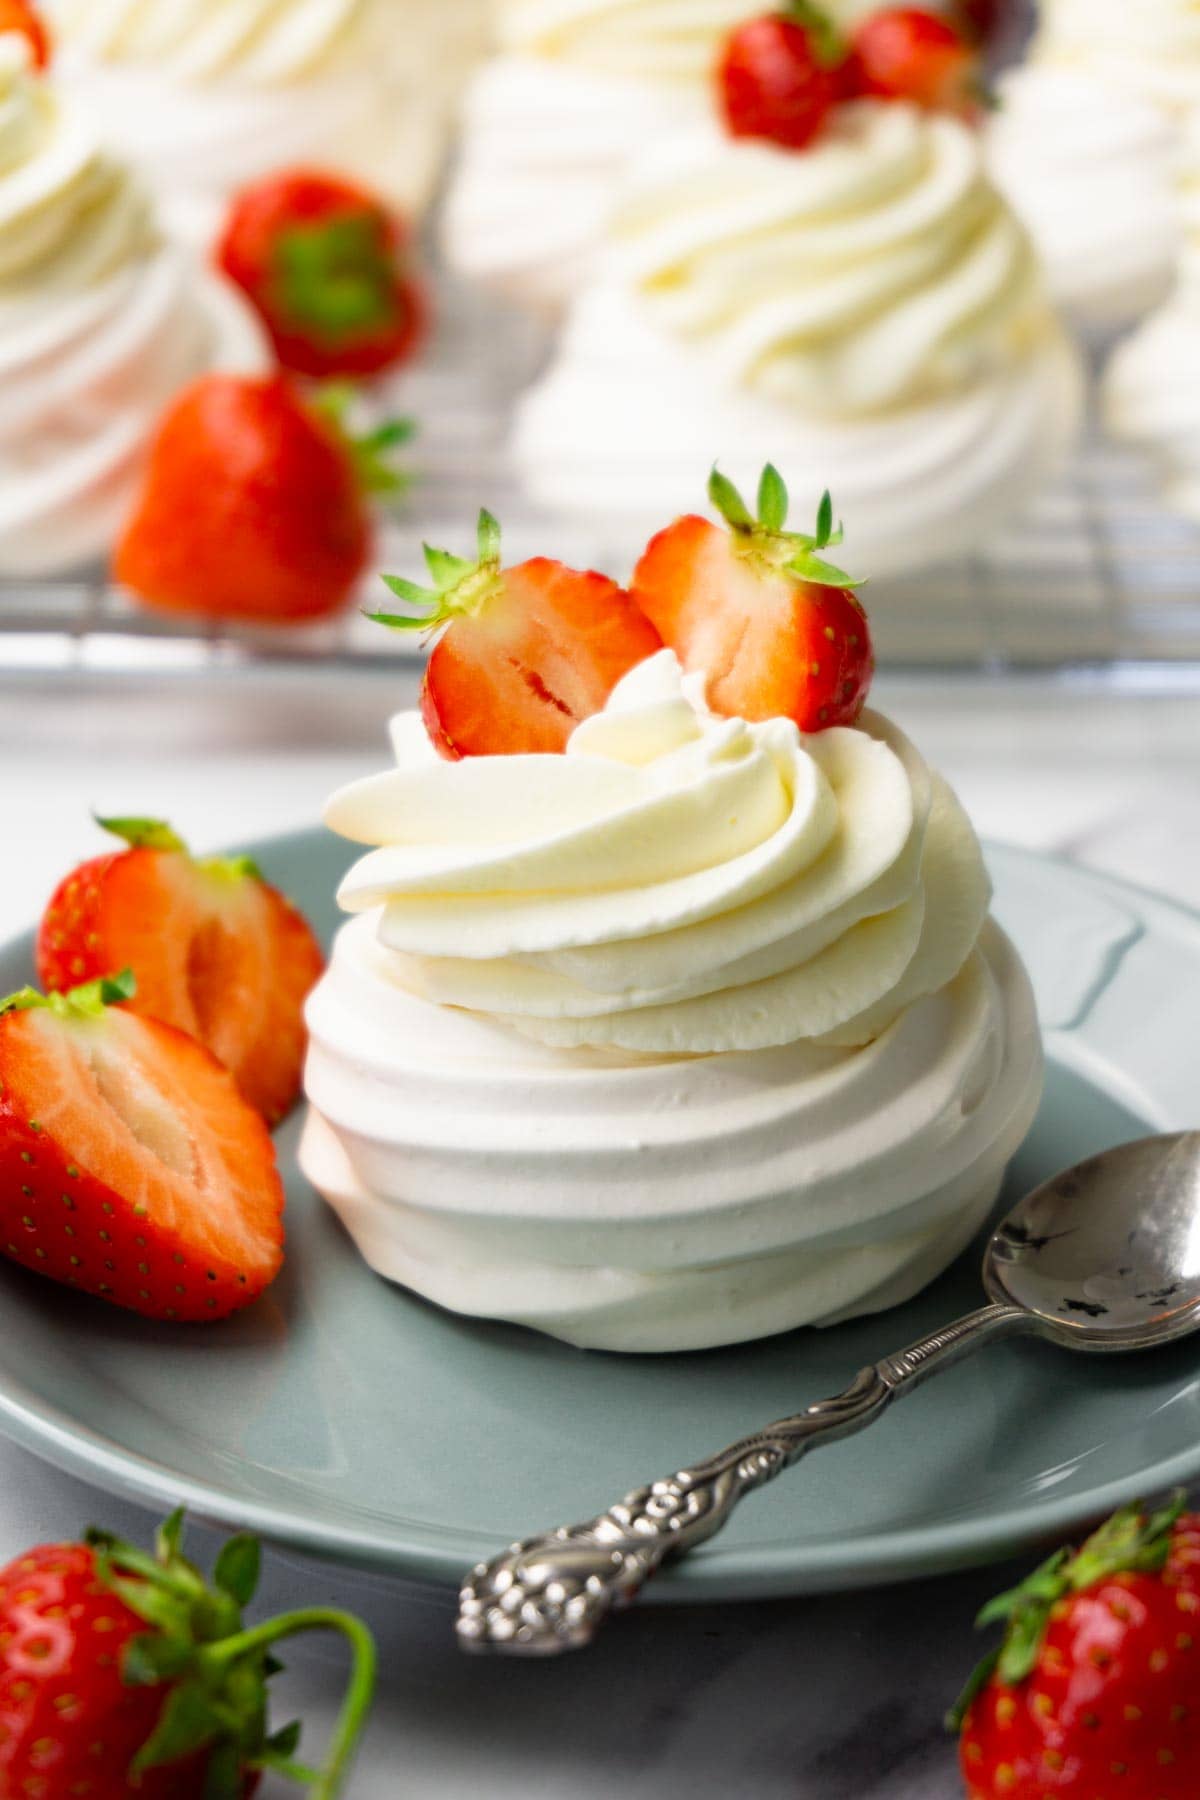 Mini pavlova nest topped with cream cheese frosting and strawberries on a small round plate, more pavlovas on a cooling rack on the background.